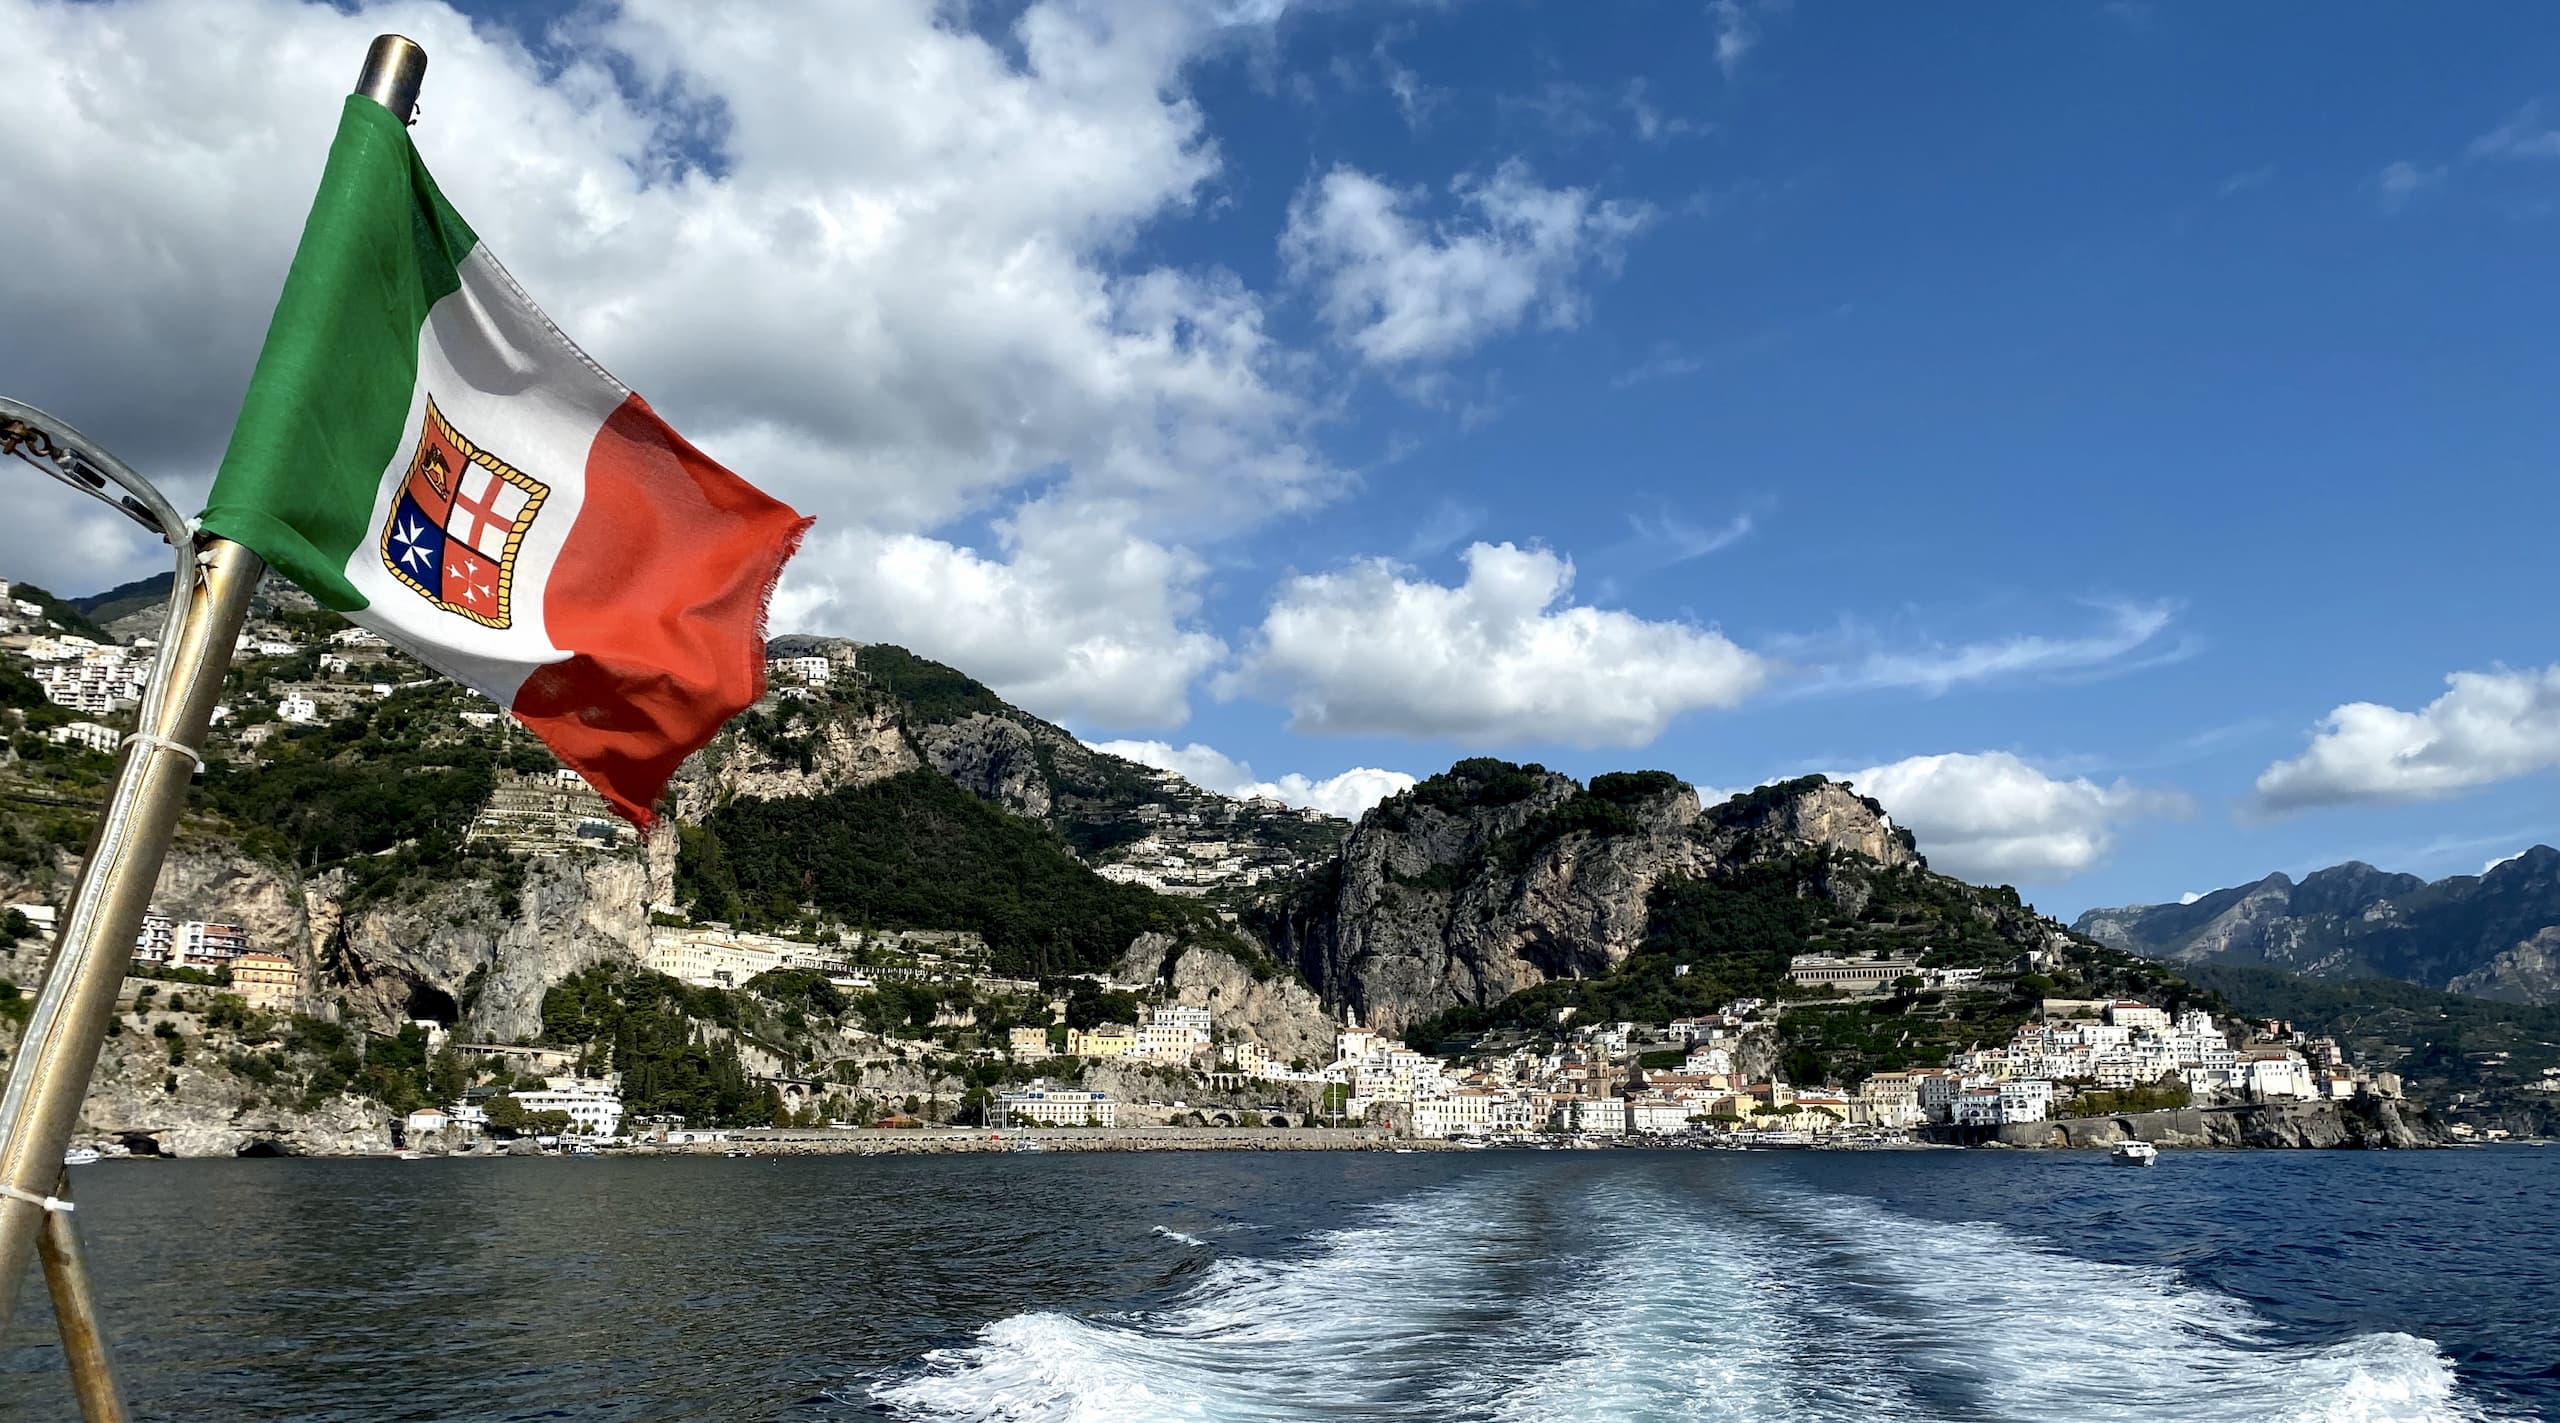 Italian flag waving on the end of a boat with coastline in background.